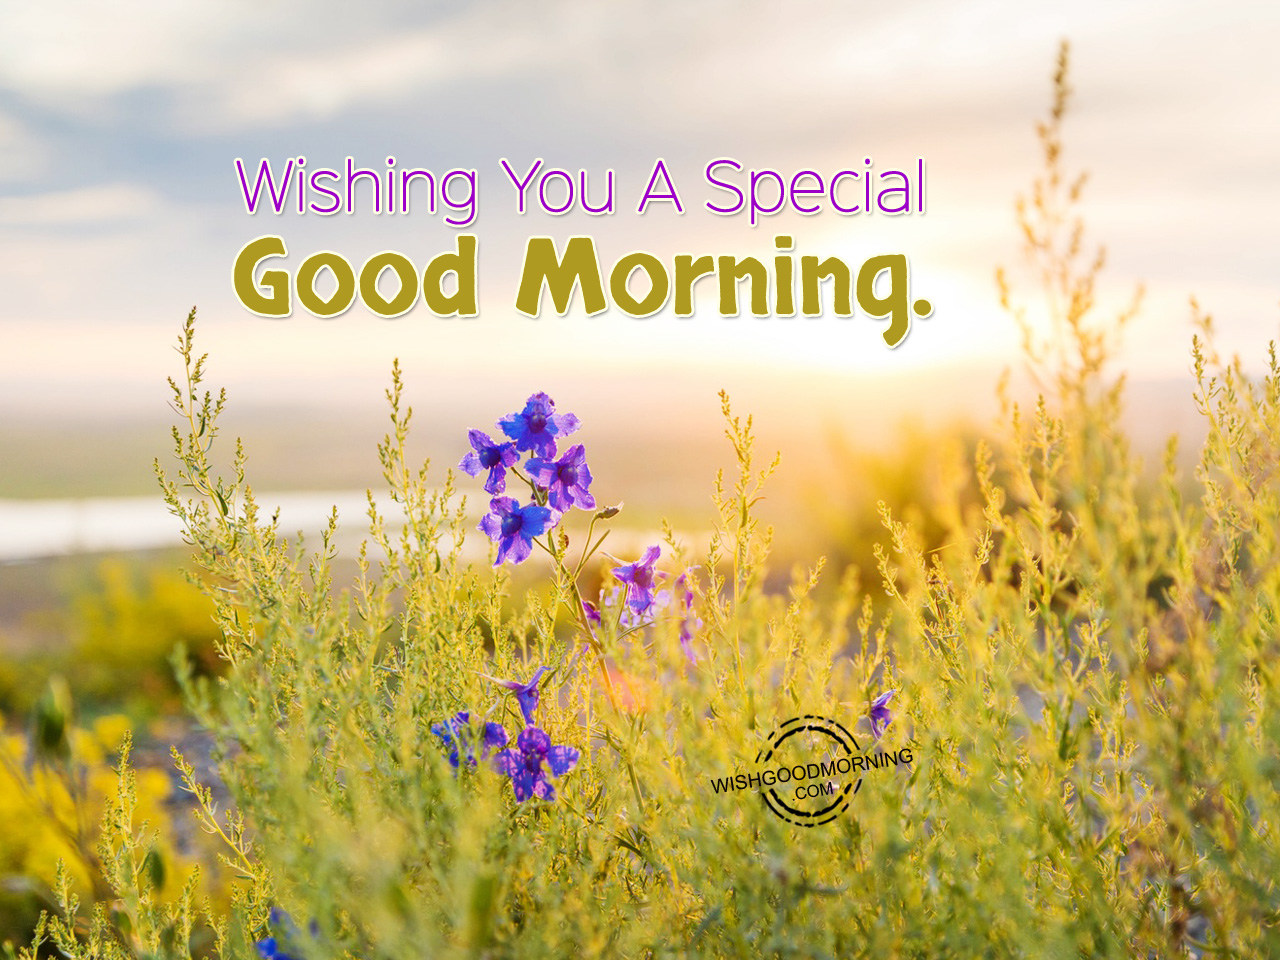 Wishing You A Special Good Morning - Good Morning Pictures ...